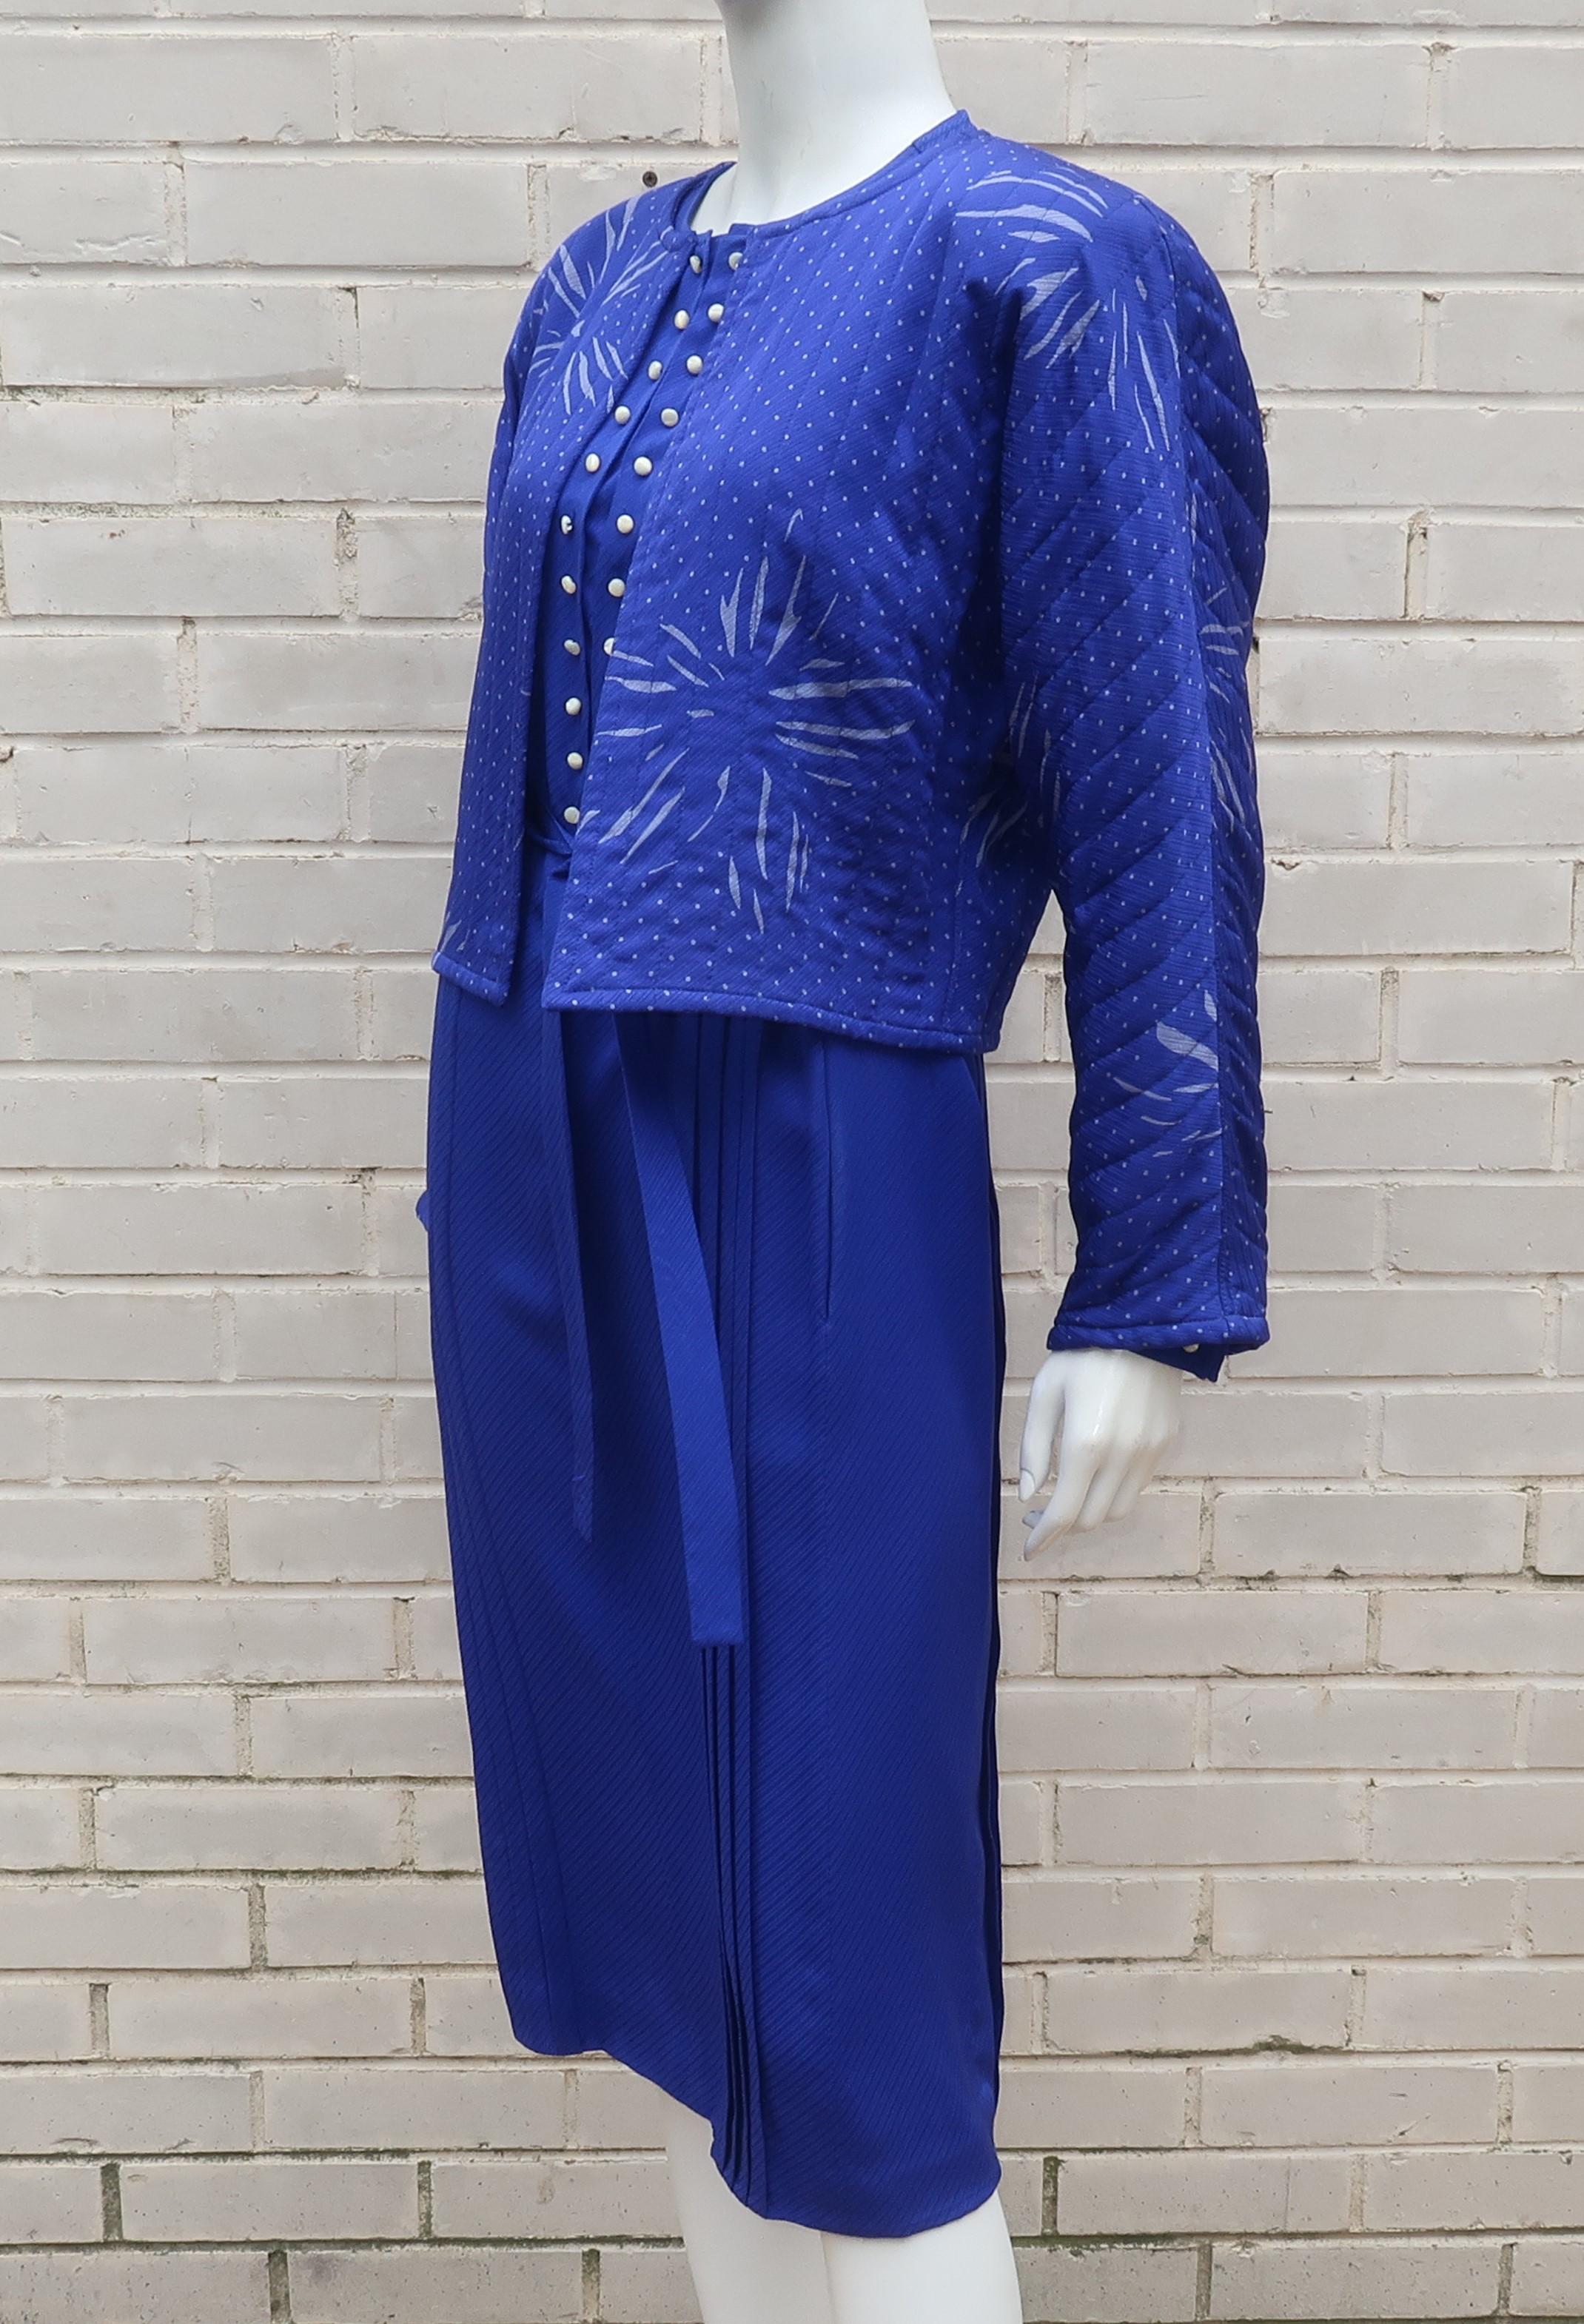 C.1980 Emanuel Ungaro royal blue silk shift dress with coordinating cropped quilted jacket with a celestial style silvery gray print.  The dress has a pullover construction with hidden snaps at the front panel which is also decorated with rows of